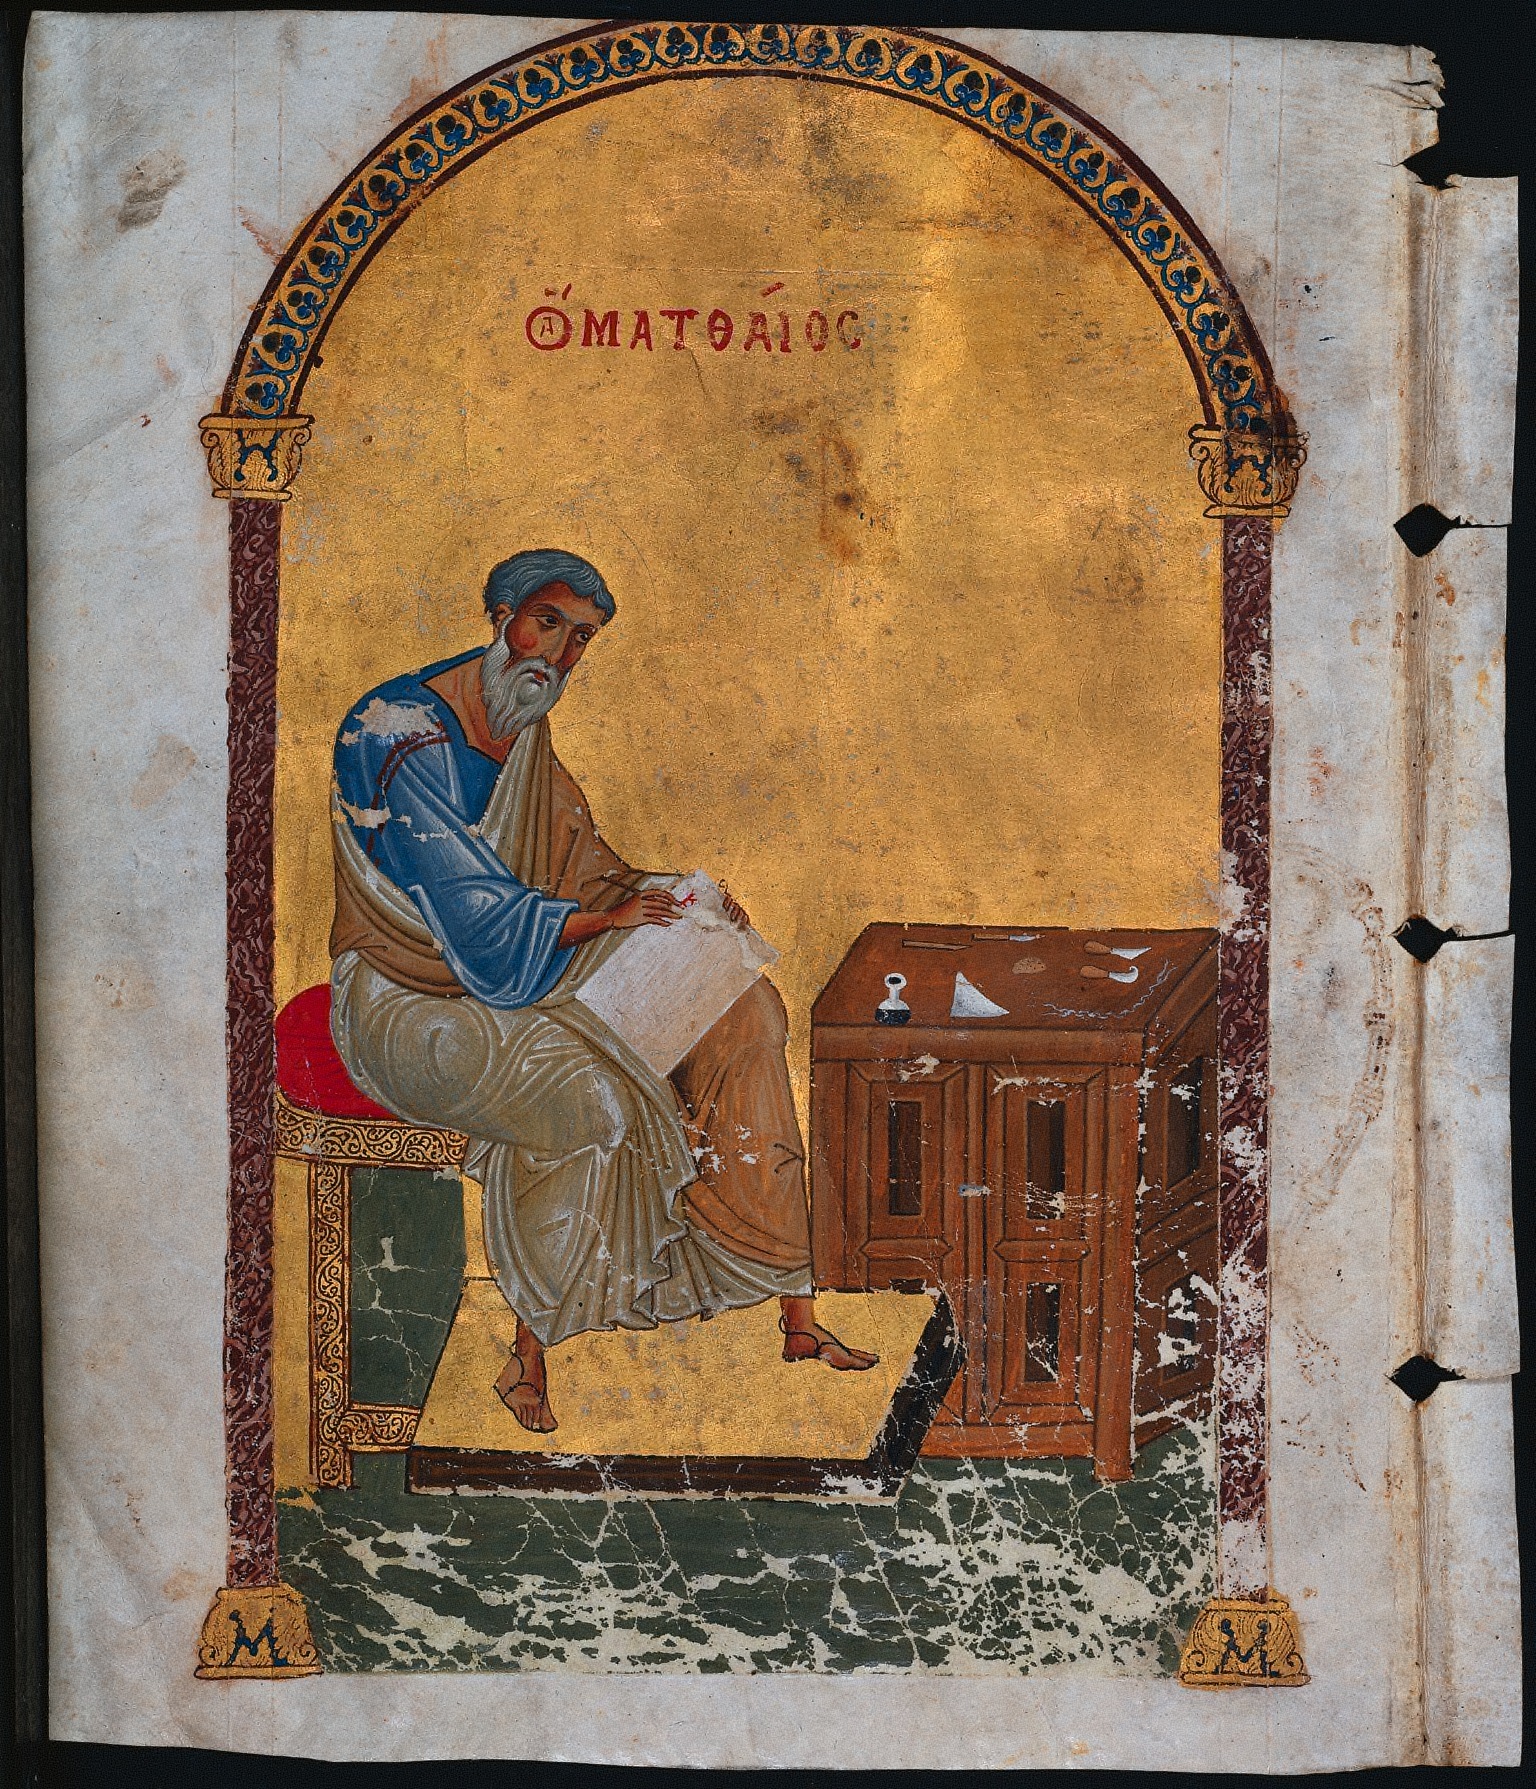 Leaf from a Lectionary with St. Matthew